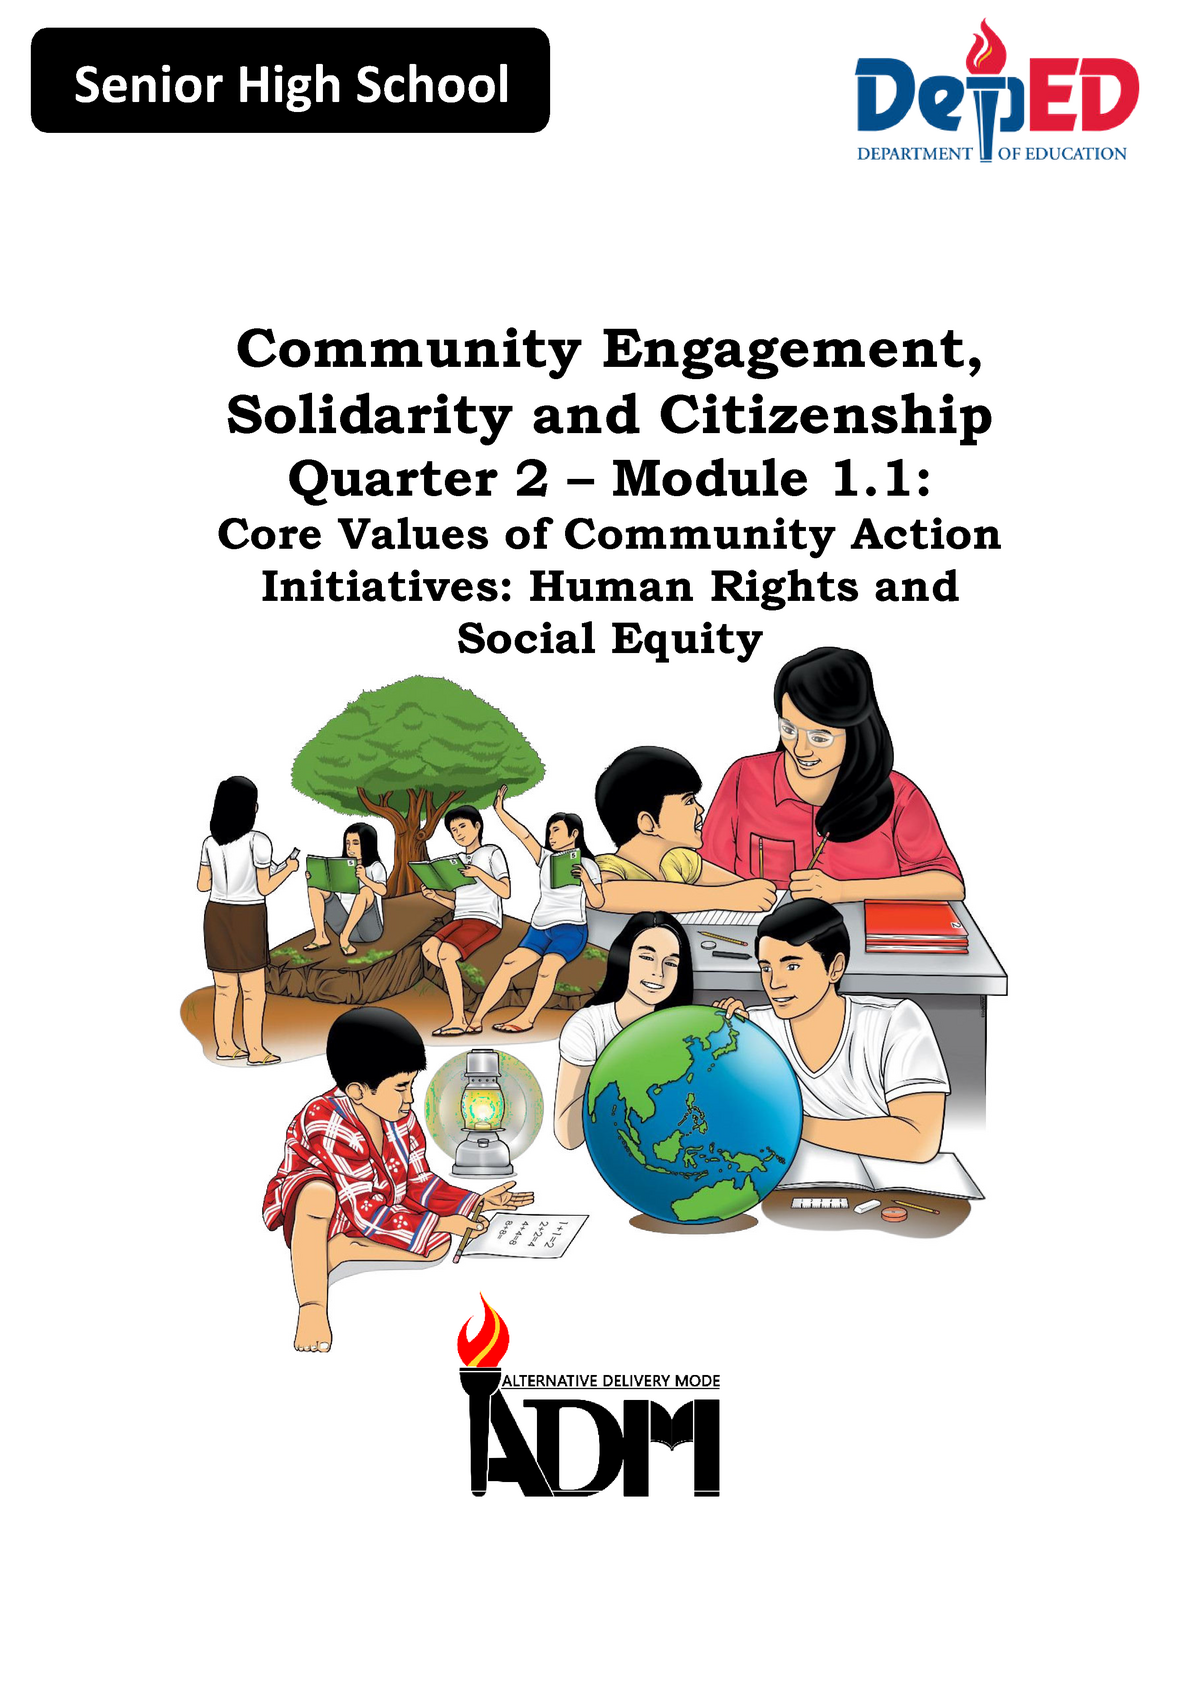 reflection essay about community engagement solidarity and citizenship